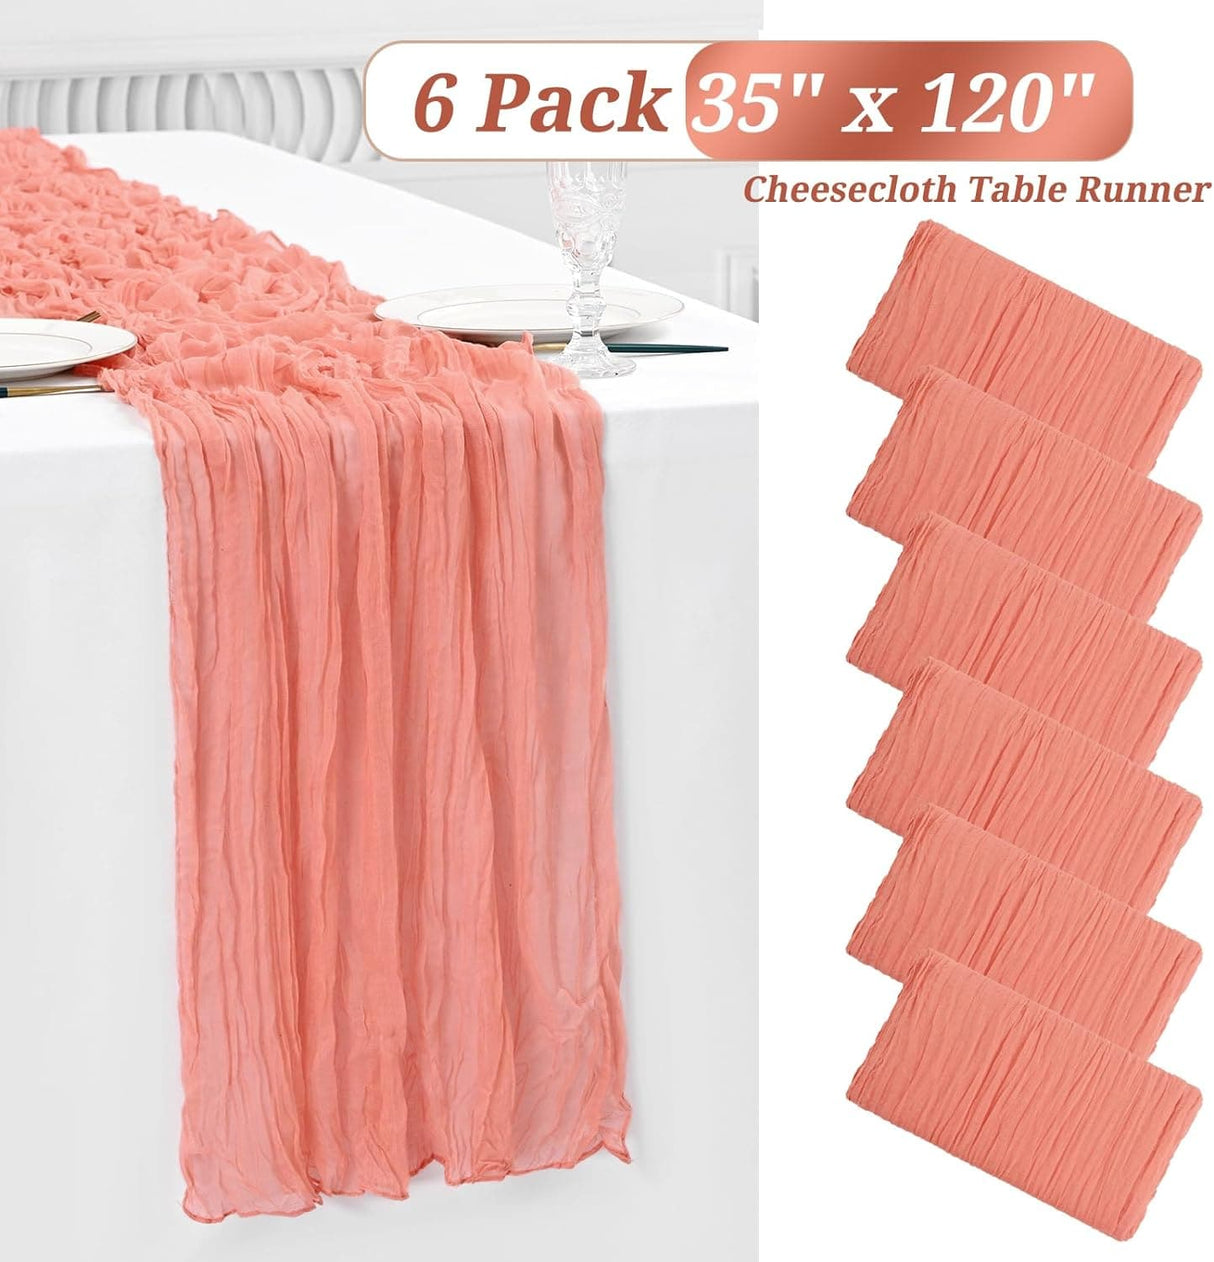 10 Pack /6 Pack Cheesecloth Table Runner Gauze Table Runner 10FT Long Semi-Sheer Table Runner Boho or Rustic Wedding Table Decor for Wedding Decor Arch Draping Bridal Shower Holiday Party